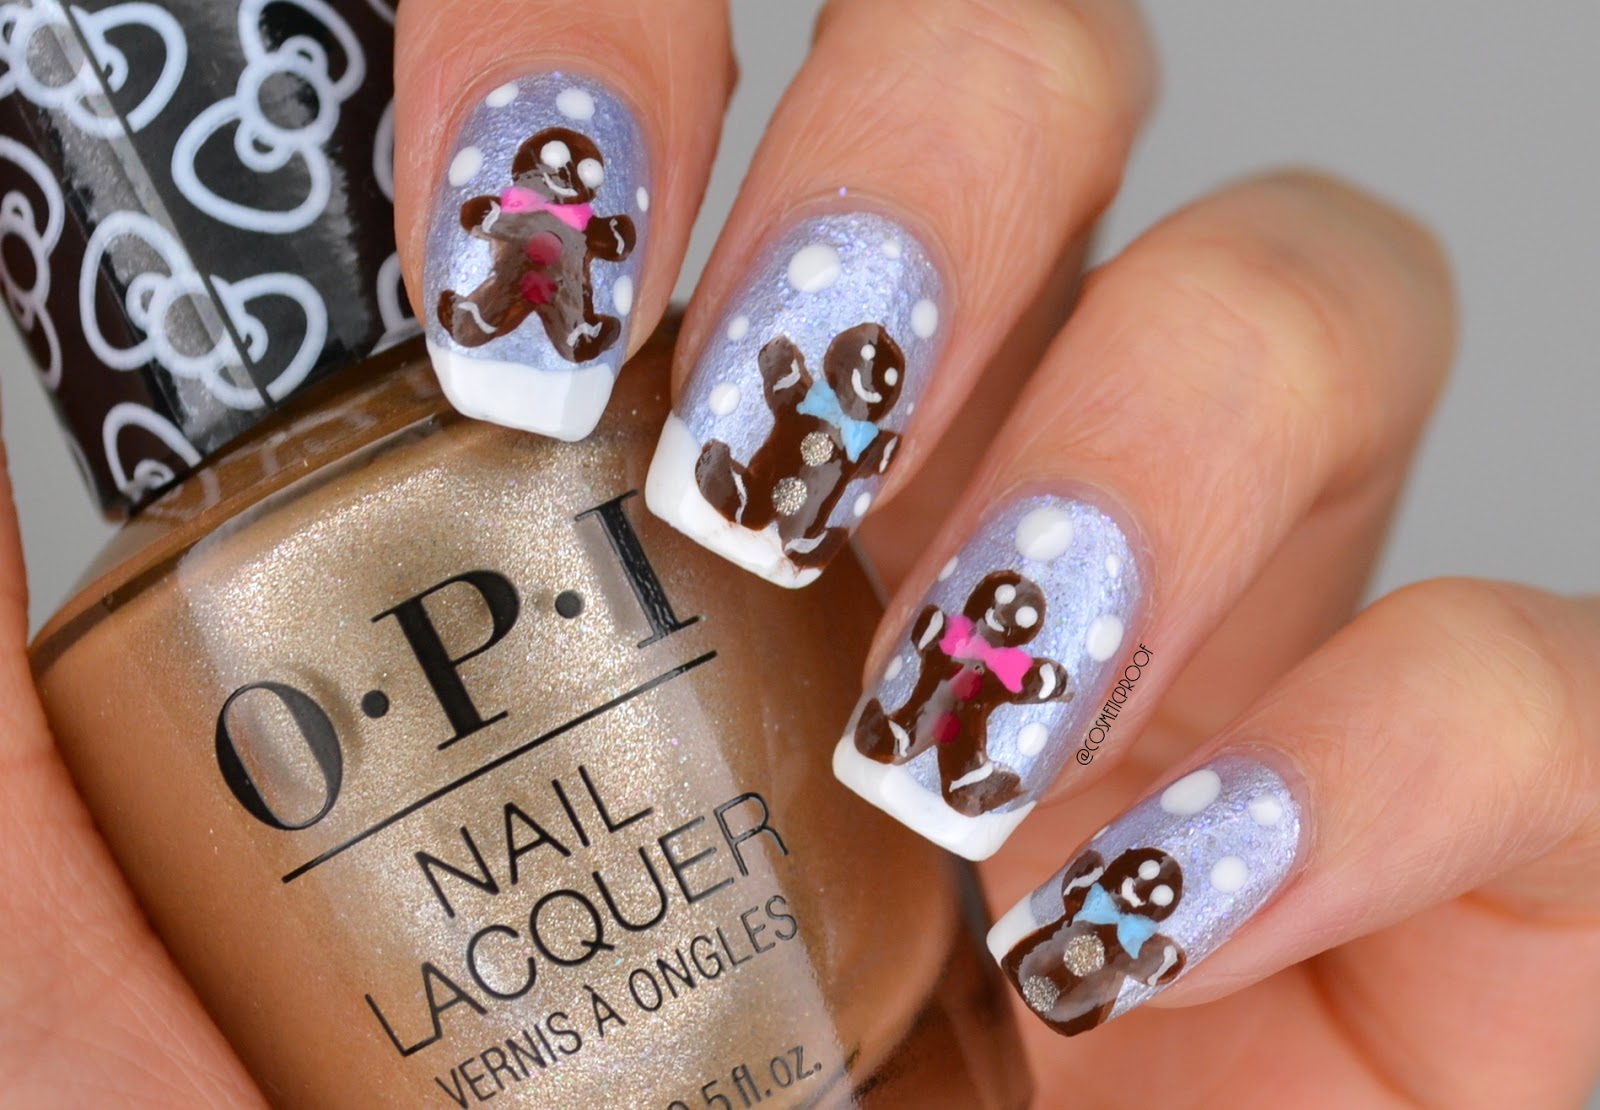 9. "Gingerbread Man Nails" - wide 1